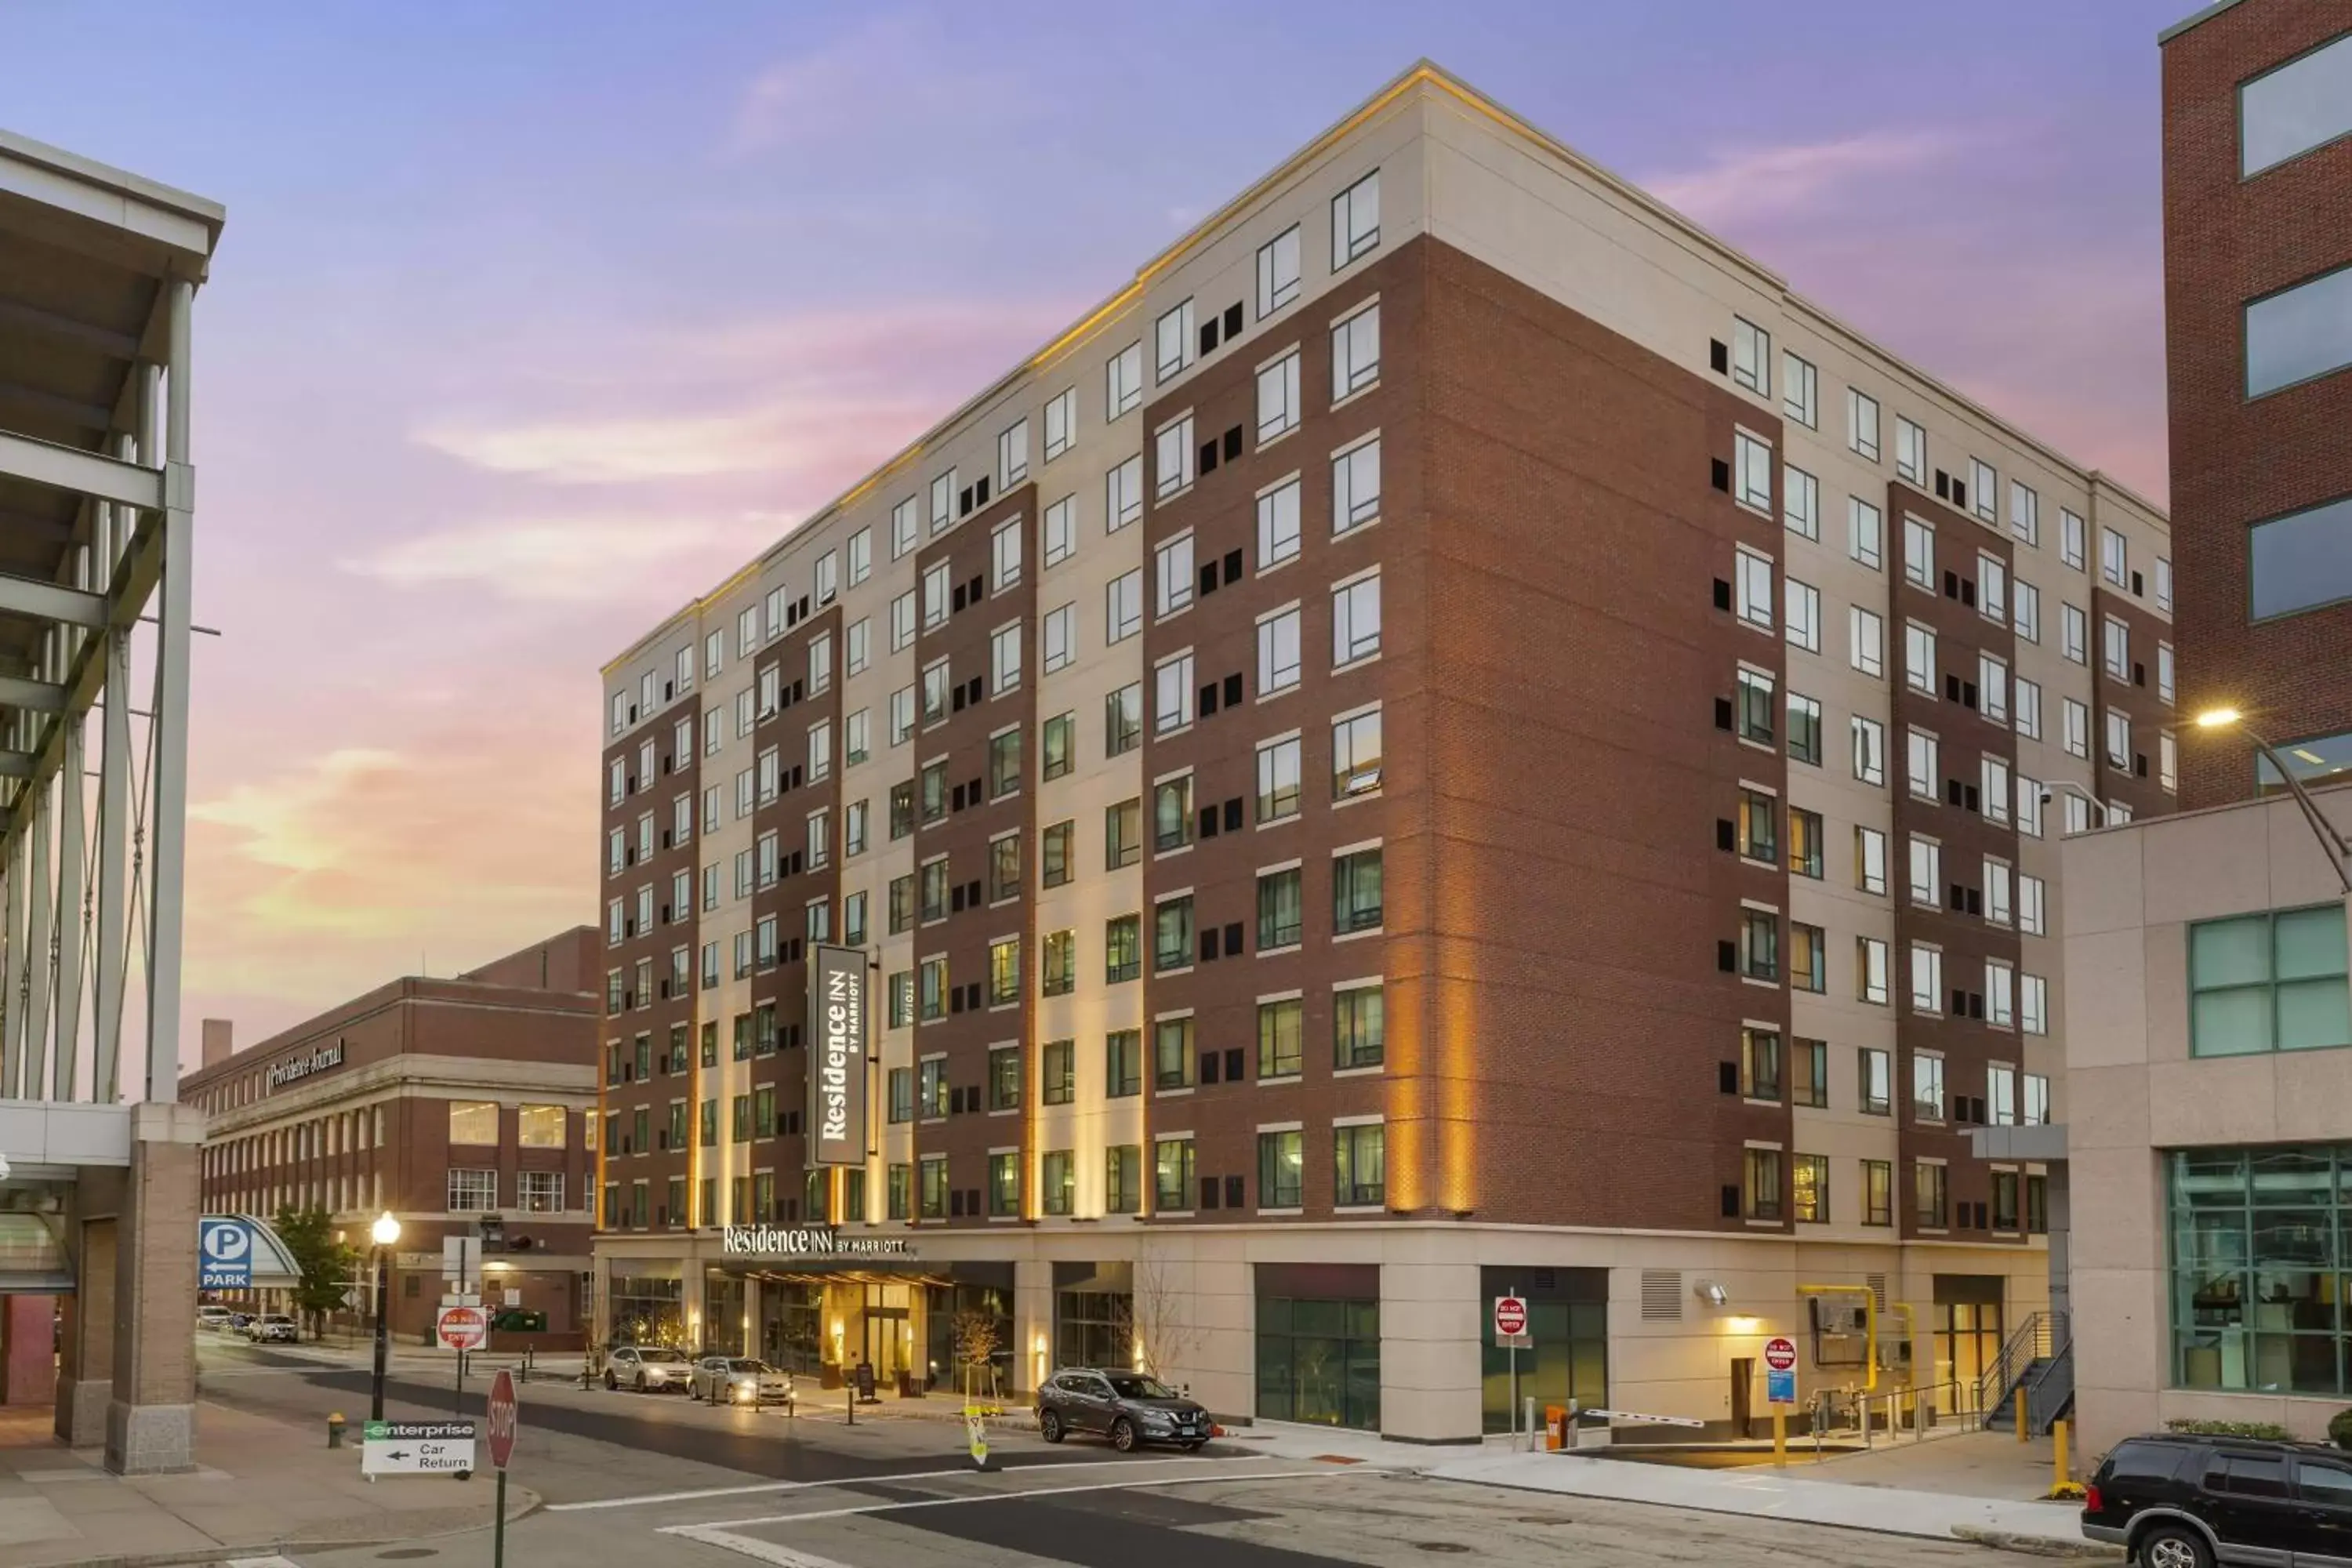 Property Building in Residence Inn Providence Downtown